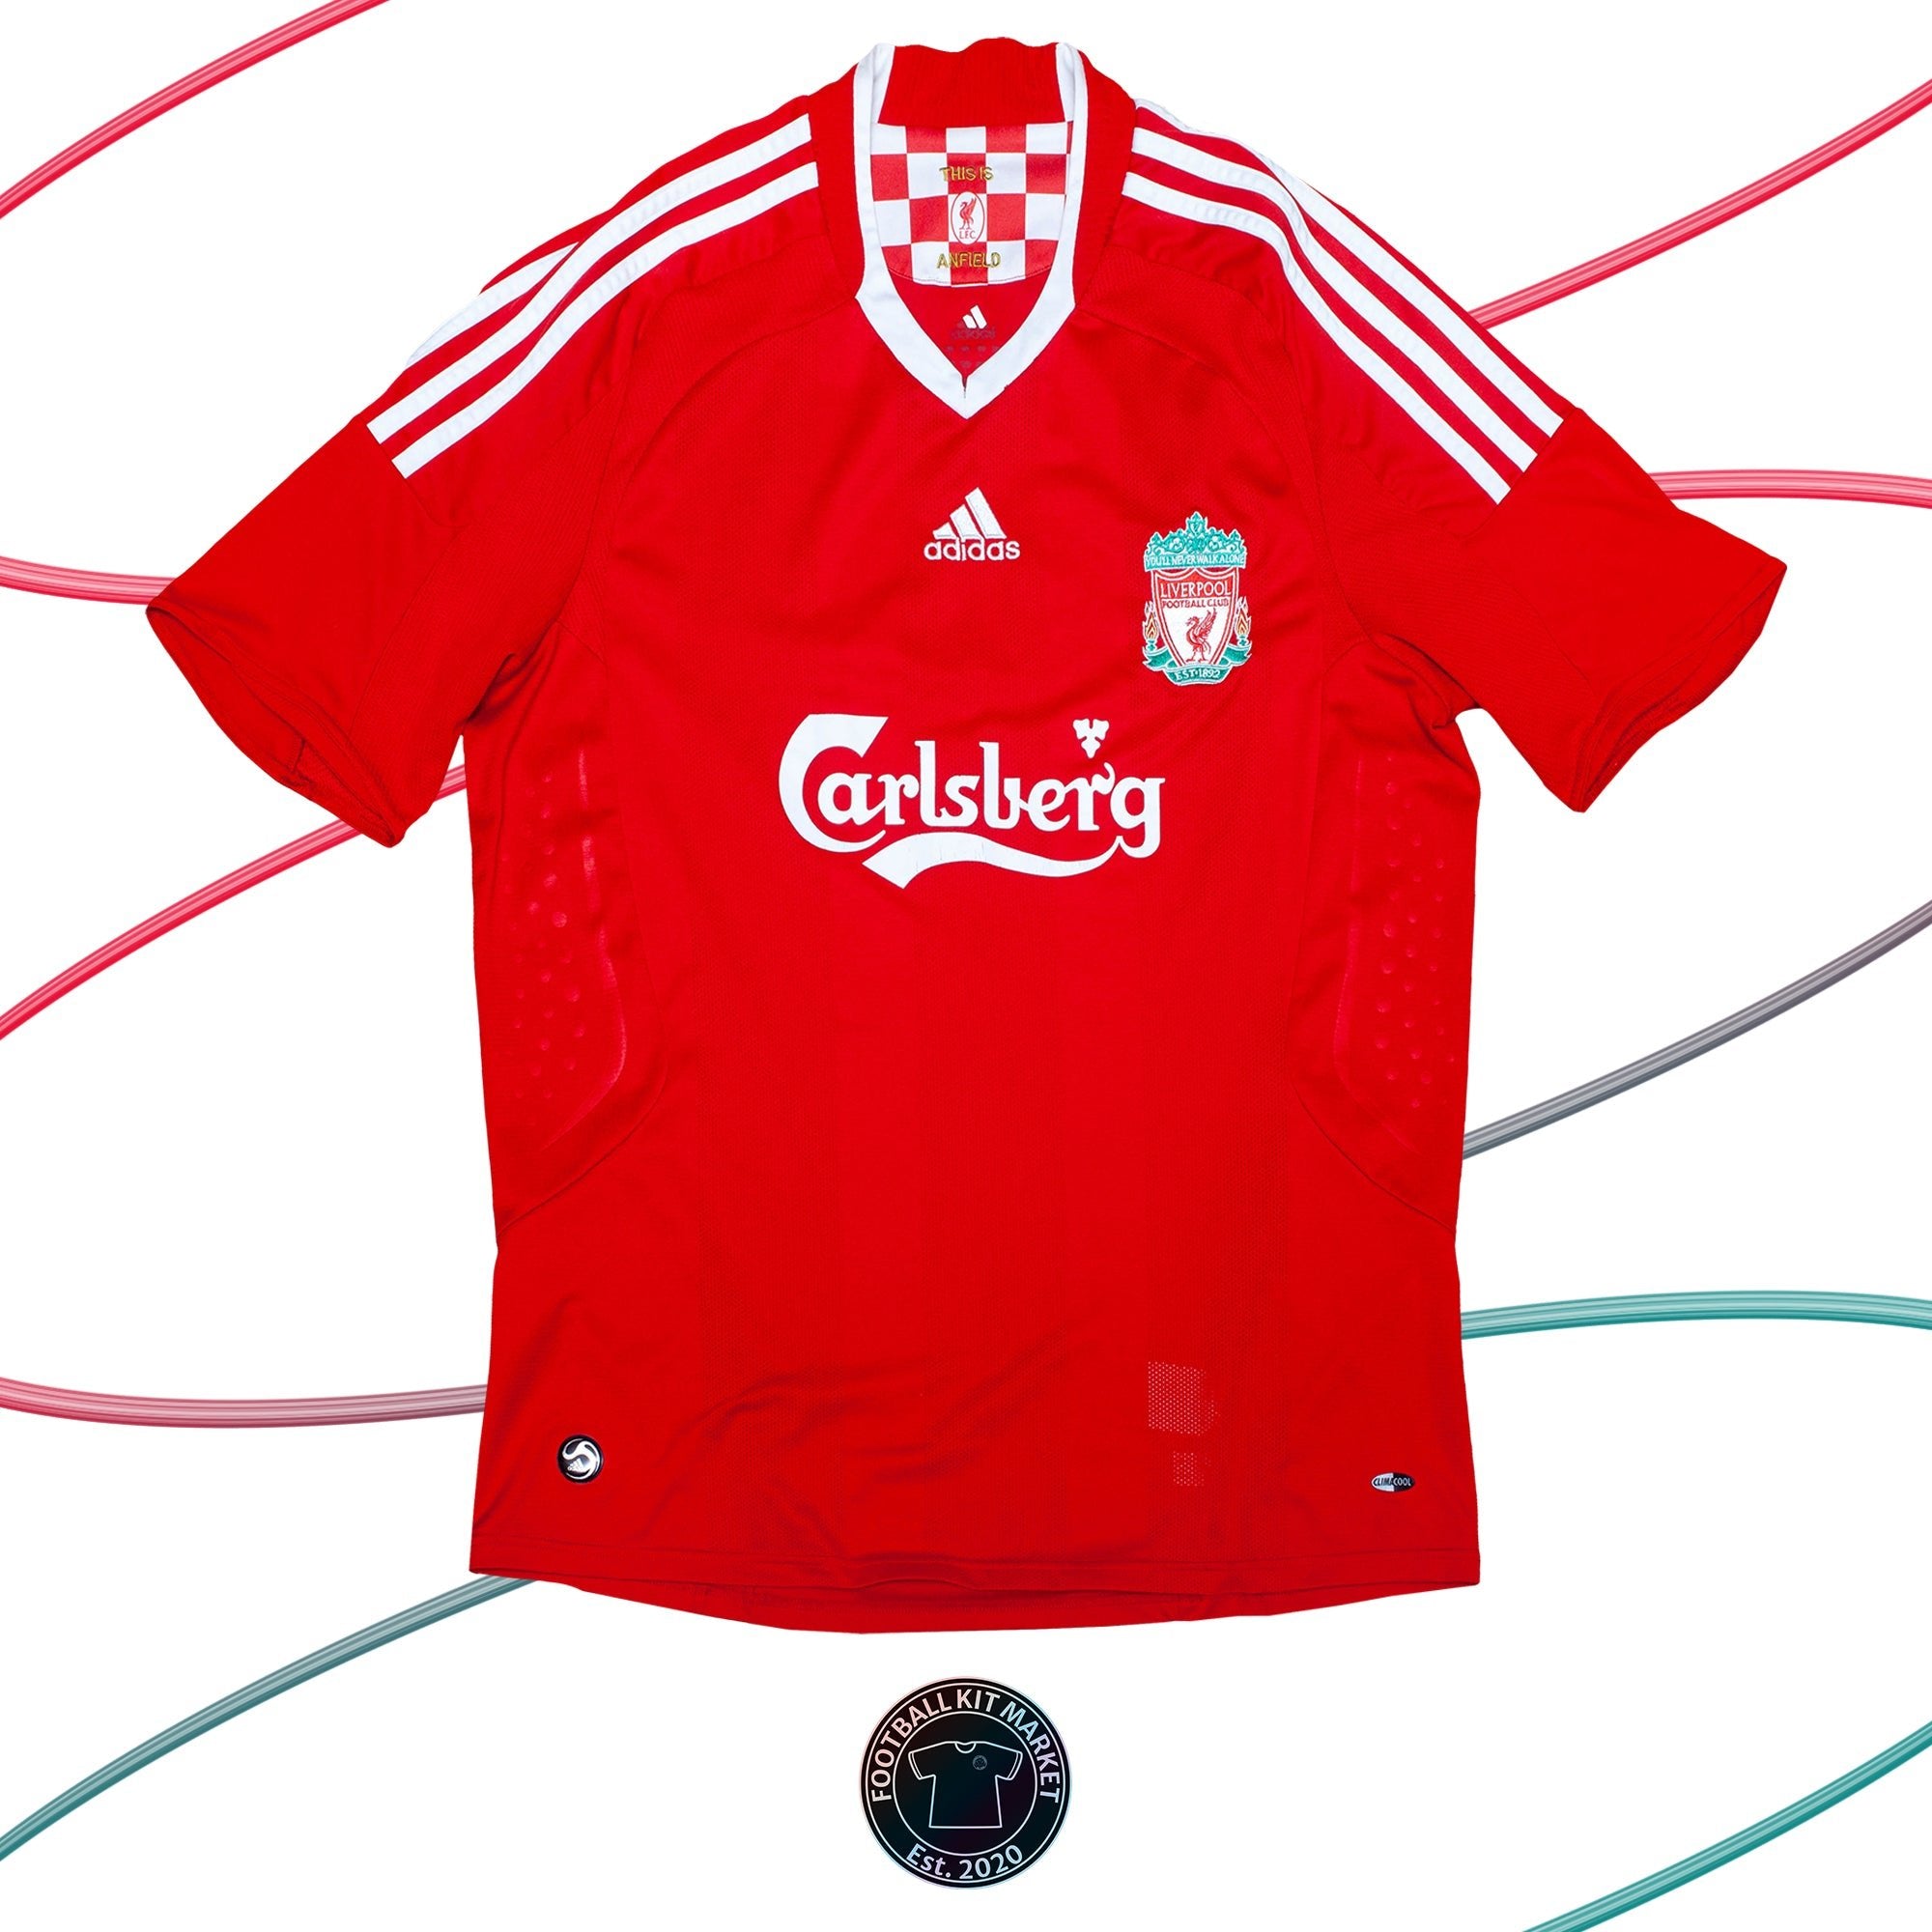 Genuine LIVERPOOL Home Shirt (2008-2010) - ADIDAS (L) - Product Image from Football Kit Market